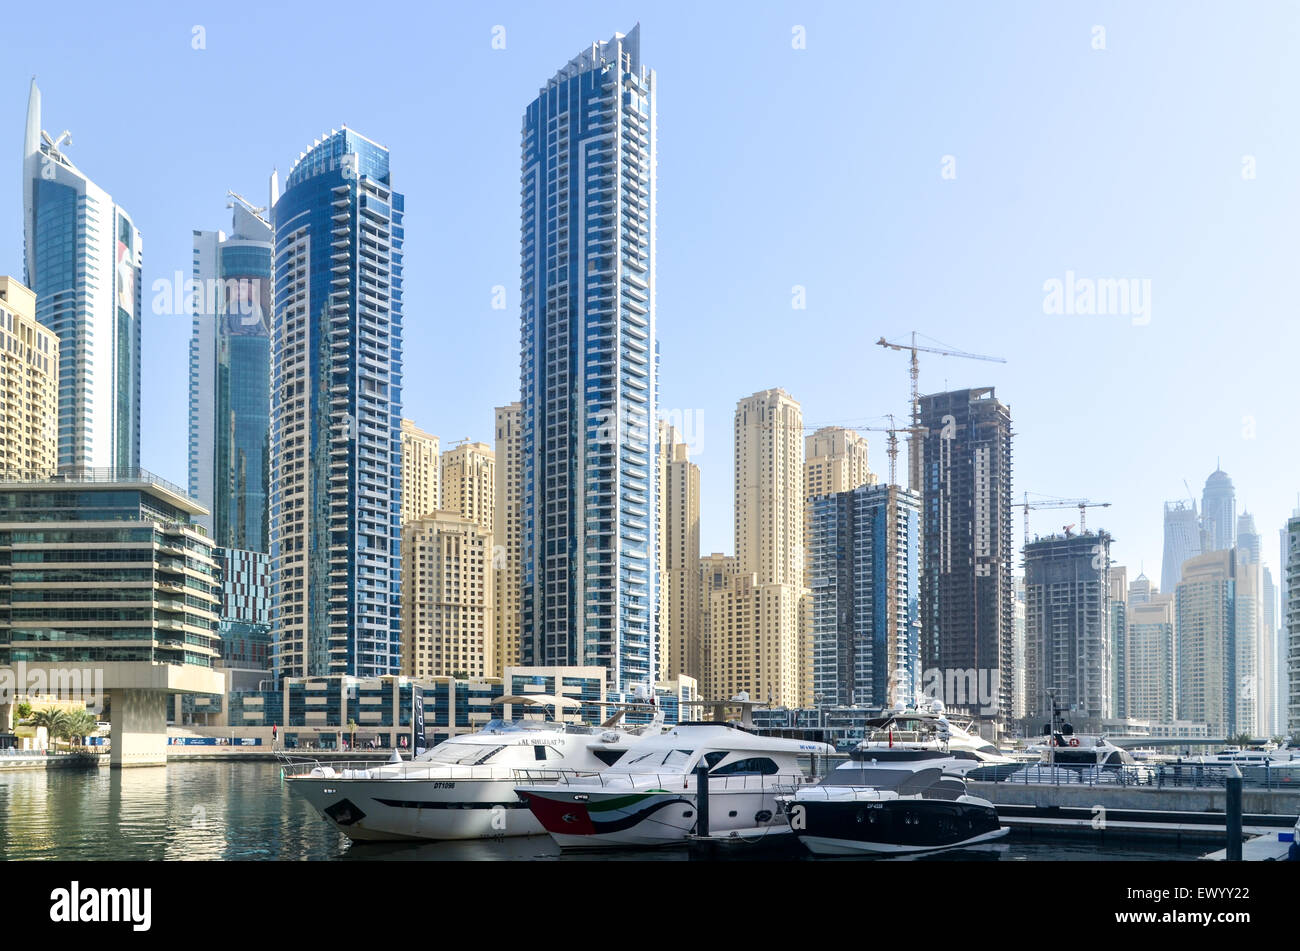 Yachts in front of the futuristic and modern high rise buildings, towers and hotels of the Dubai Marina, United Arab Emirates Stock Photo